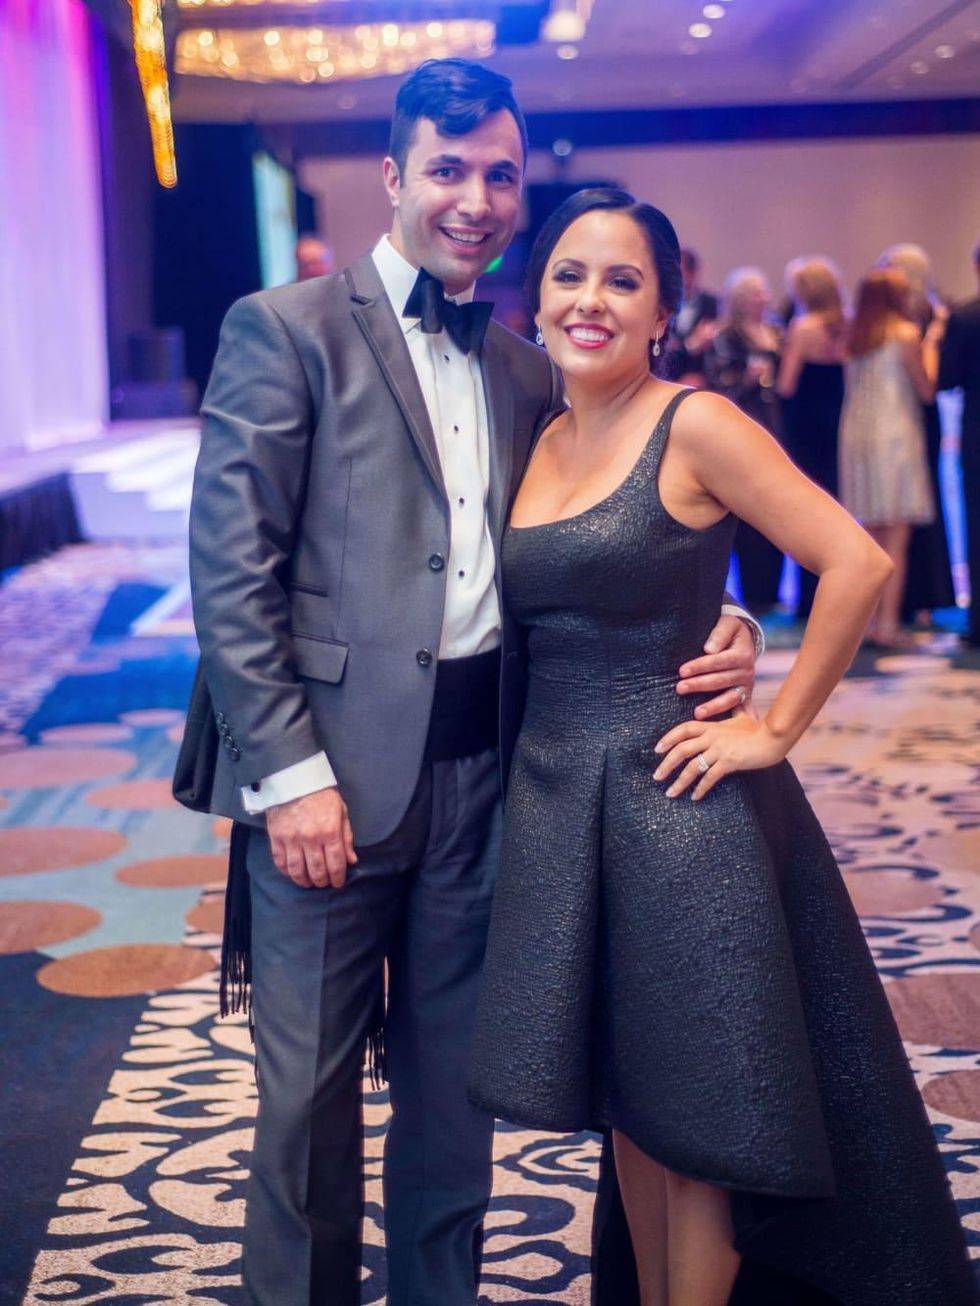 Local celebs take center stage at Austin's very own Dancing with the ...